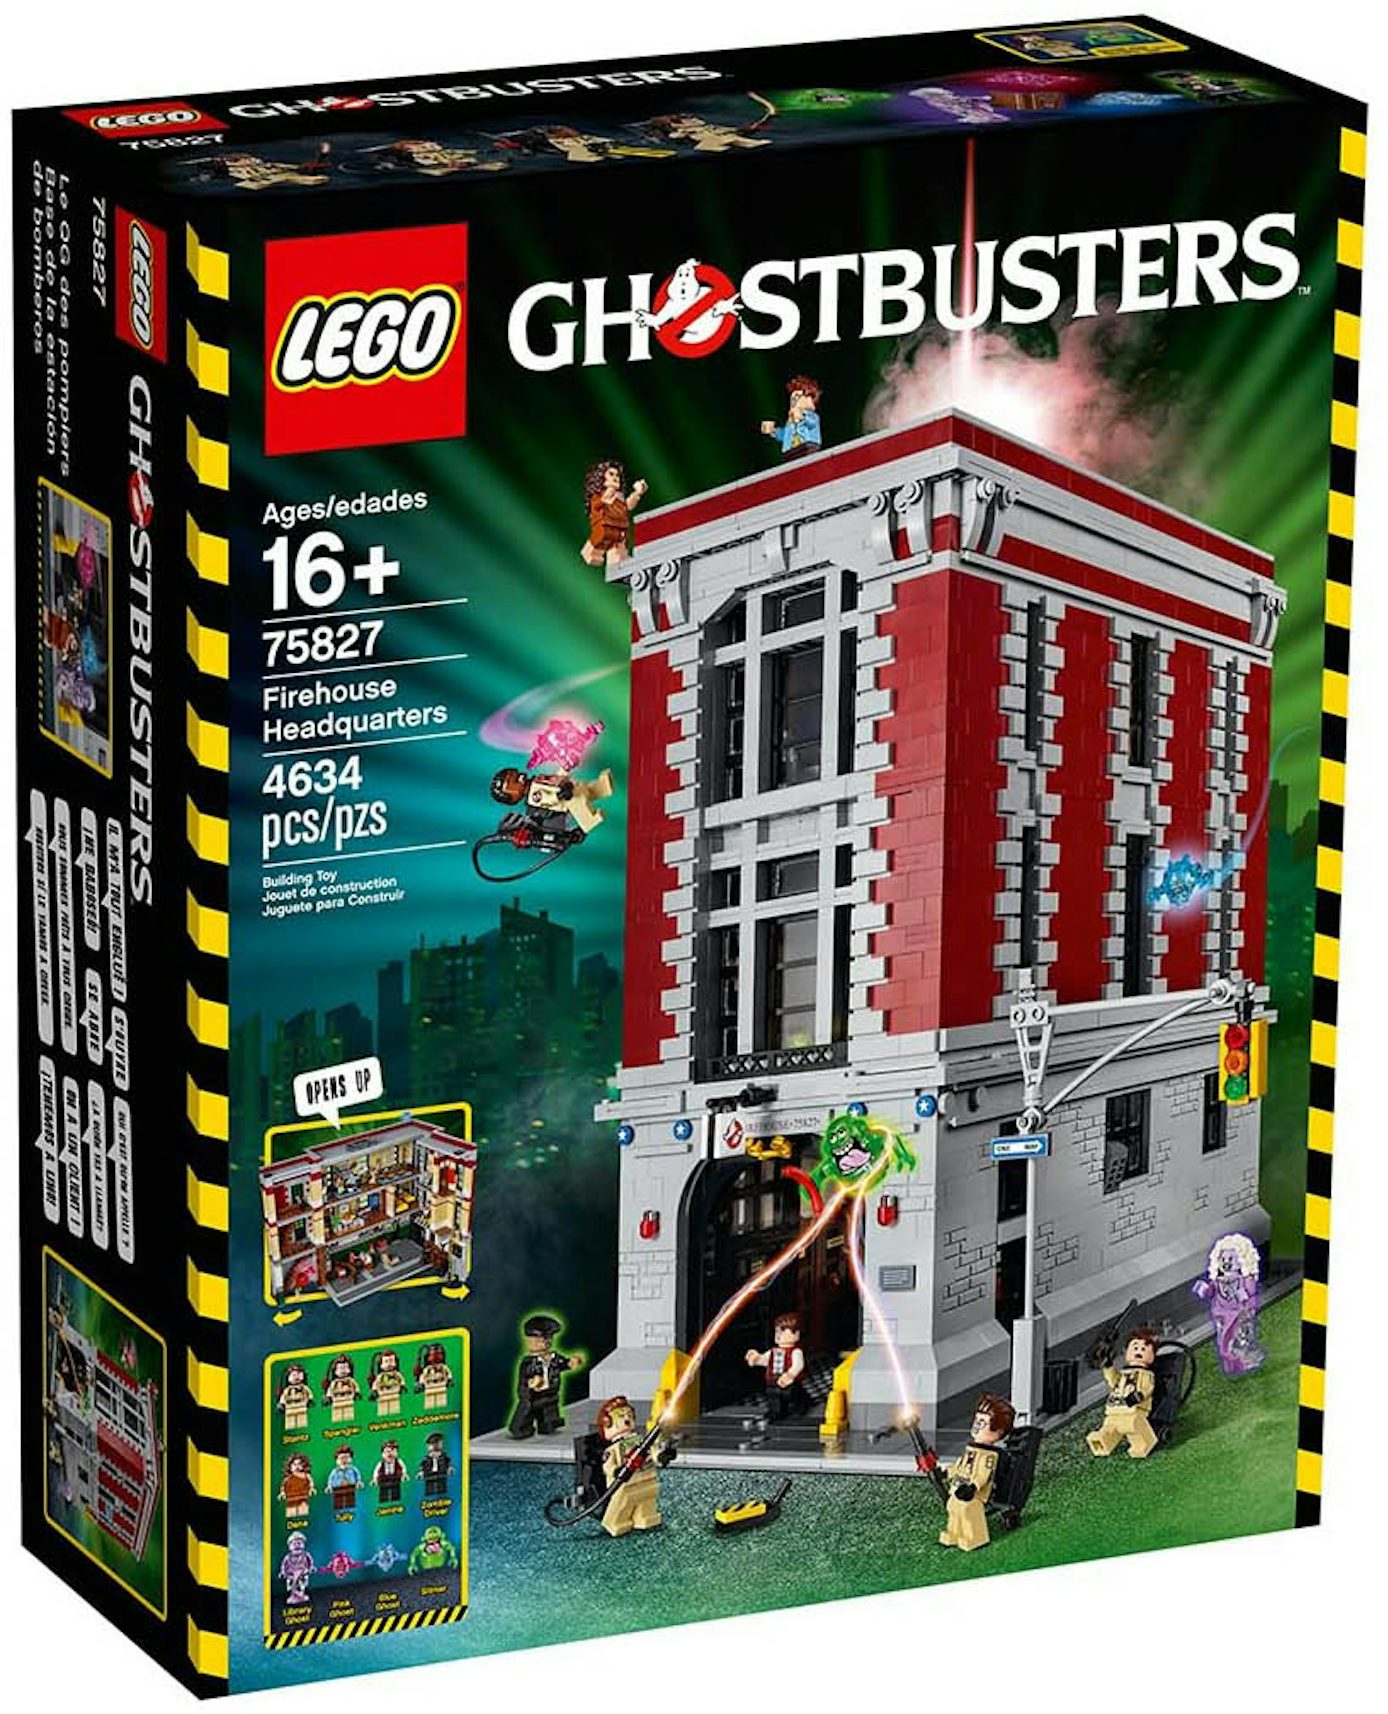 LEGO Ghostbusters Firehouse Headquarters Set 75827